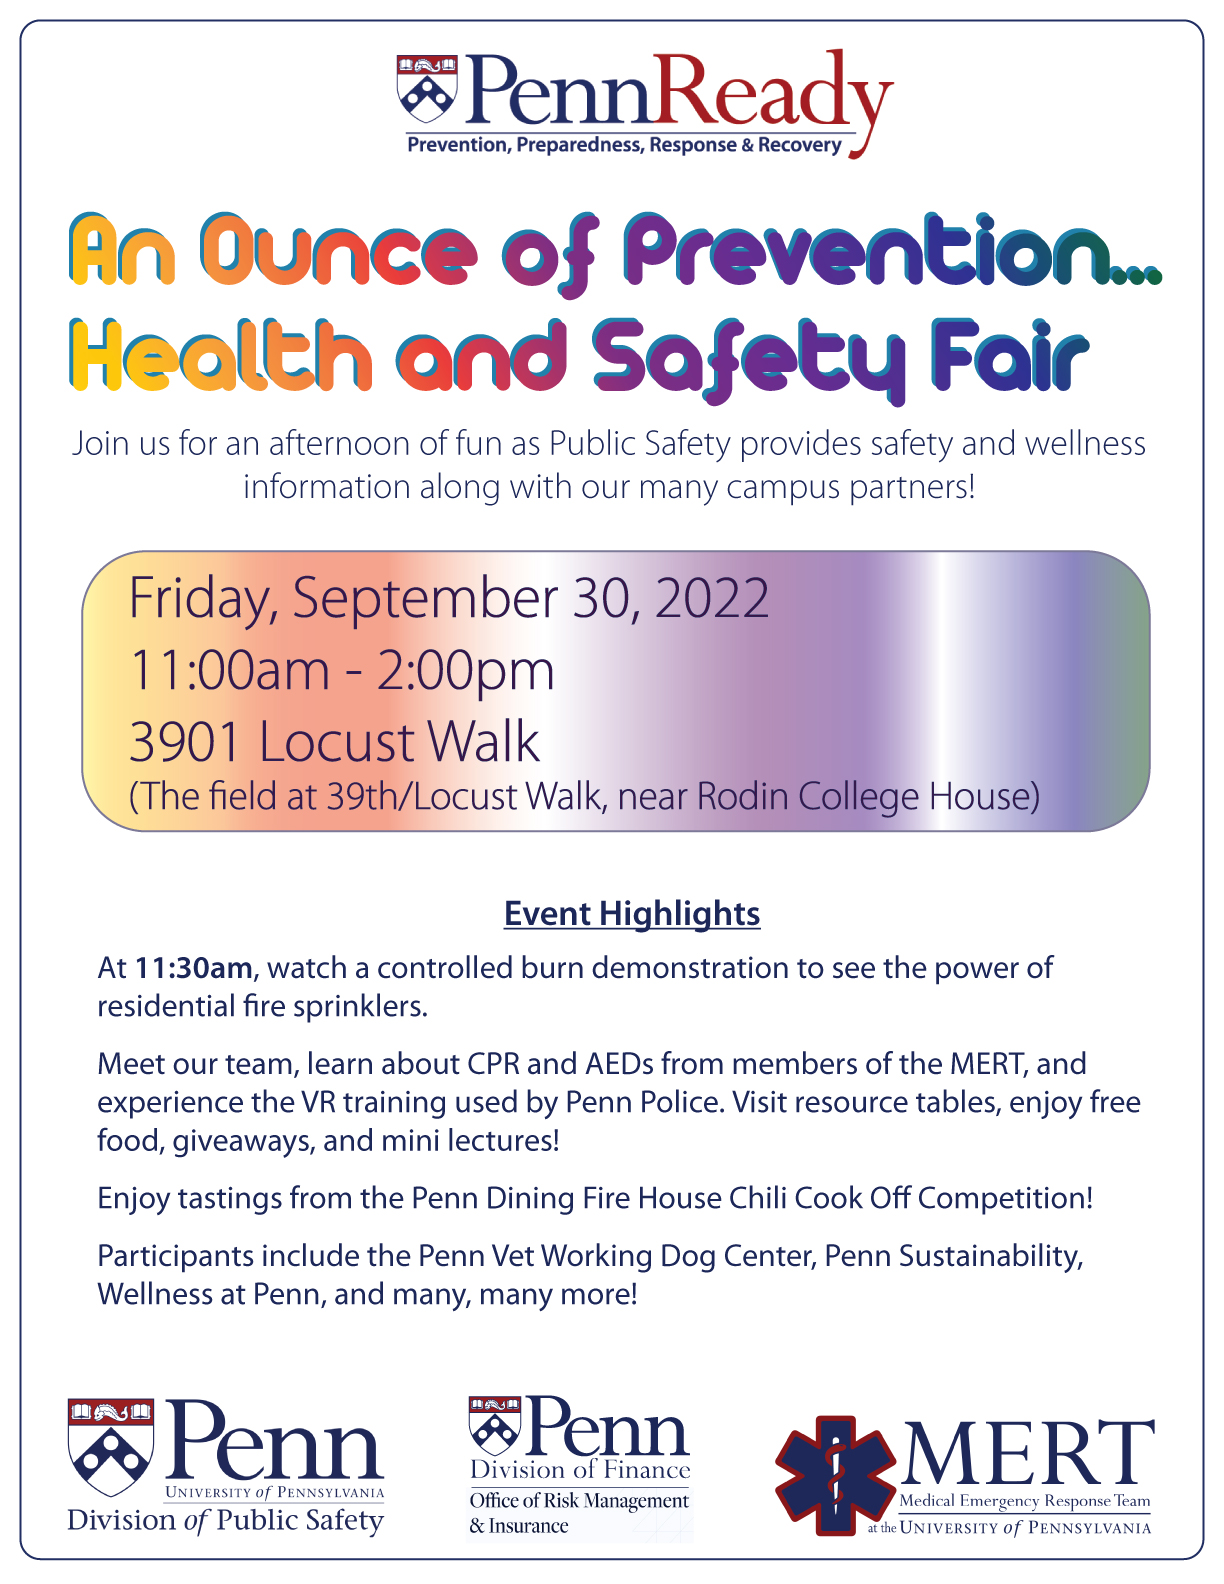 PennReady "An Ounce of Prevention" Health and SAfety Fair. Join us for an afternoon of fun as Public Safety provides safety and wellness information along with our many campus partners! Friday, September 30, 2022 11:00am - 2:00pm 3901 Locust Walk (The field at 39th/Locust Walk, near Rodin College House)